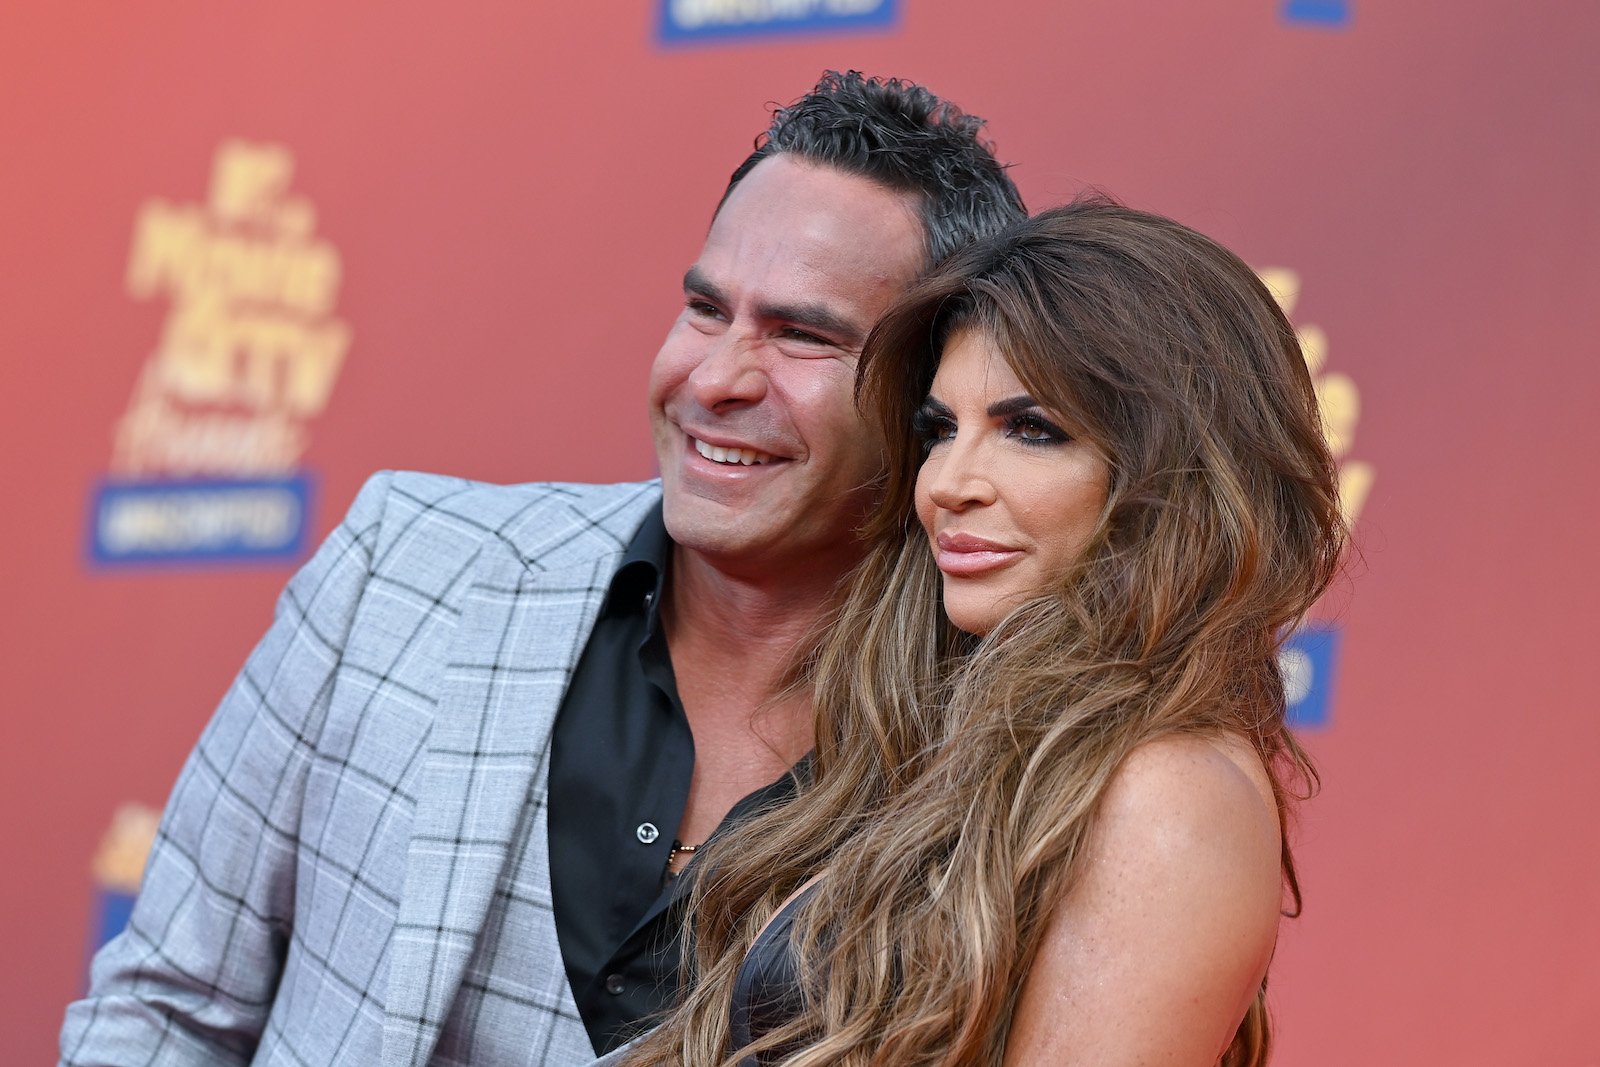 Luis Ruelas and Teresa Giudice on the red carpet at the MTV Awards